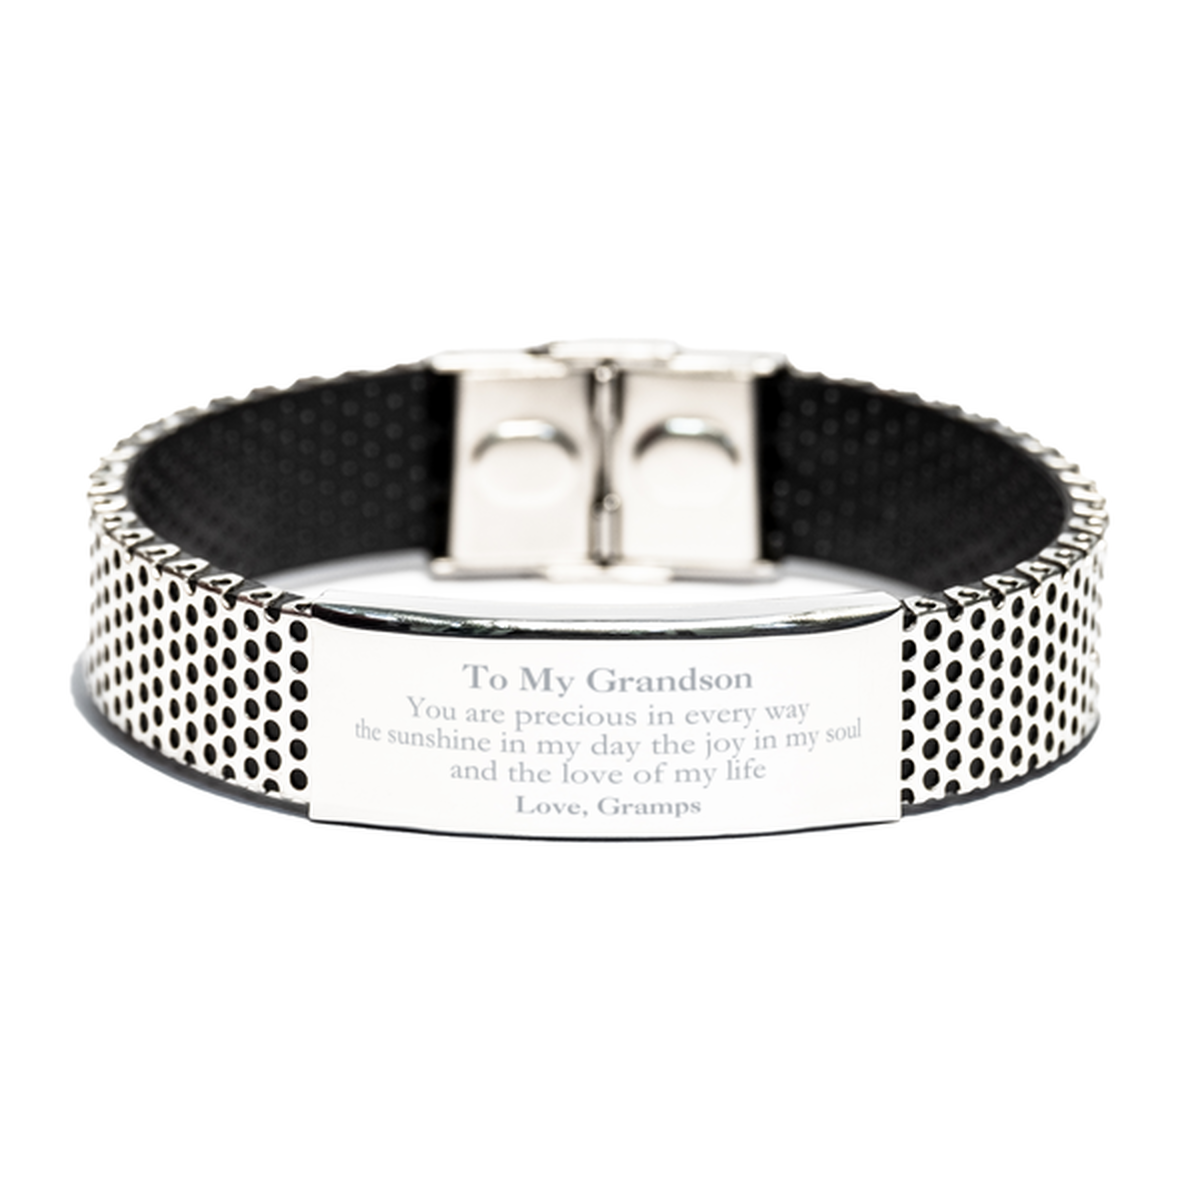 Graduation Gifts for Grandson Stainless Steel Bracelet Present from Gramps, Christmas Grandson Birthday Gifts Grandson You are precious in every way the sunshine in my day. Love, Gramps